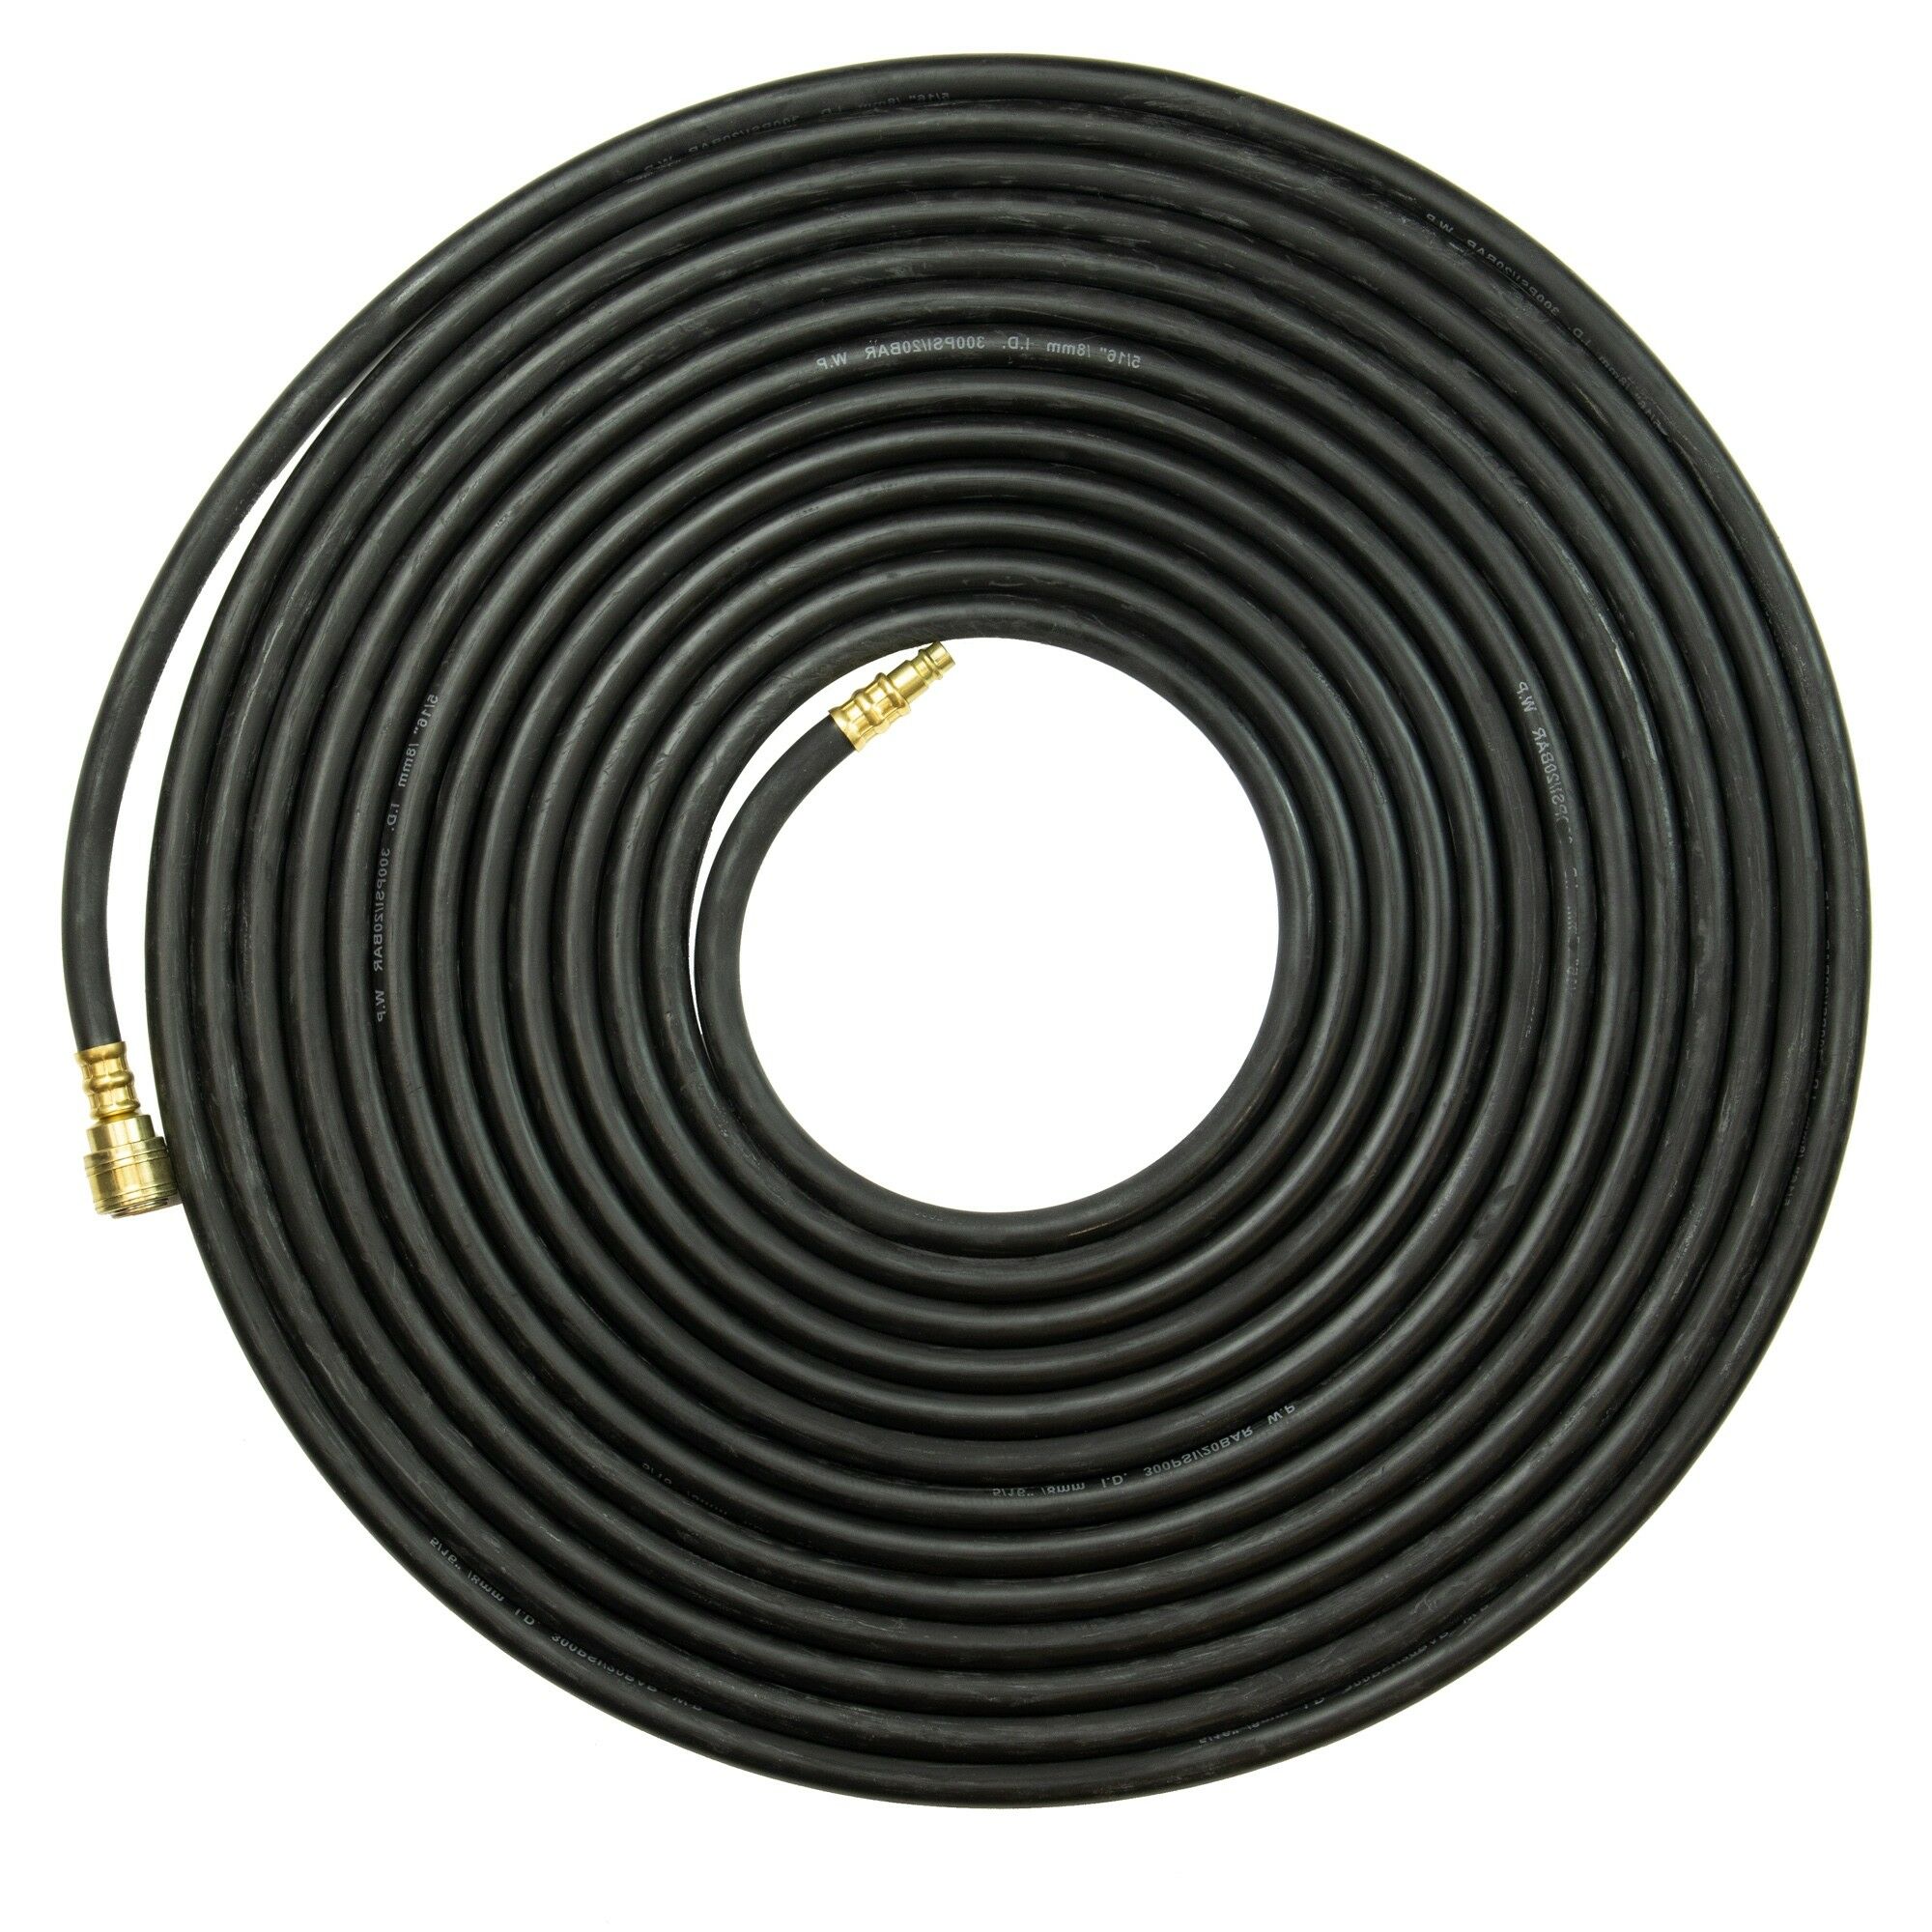 SGS 8mm Rubber Air Compressor Hose With Quick Couplers - 15m